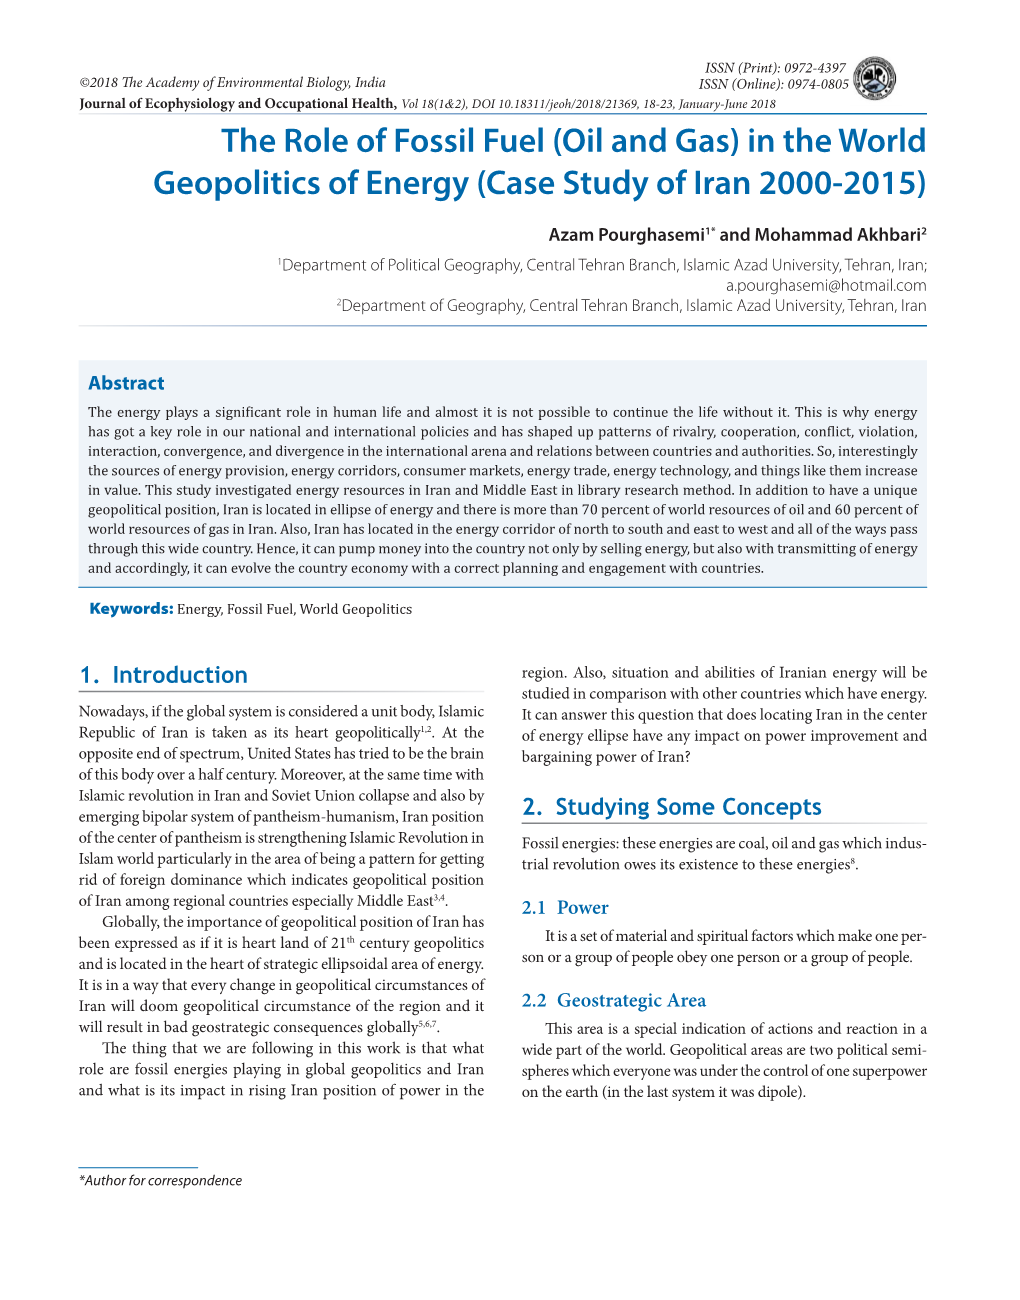 The Role of Fossil Fuel (Oil and Gas) in the World Geopolitics of Energy (Case Study of Iran 2000-2015)